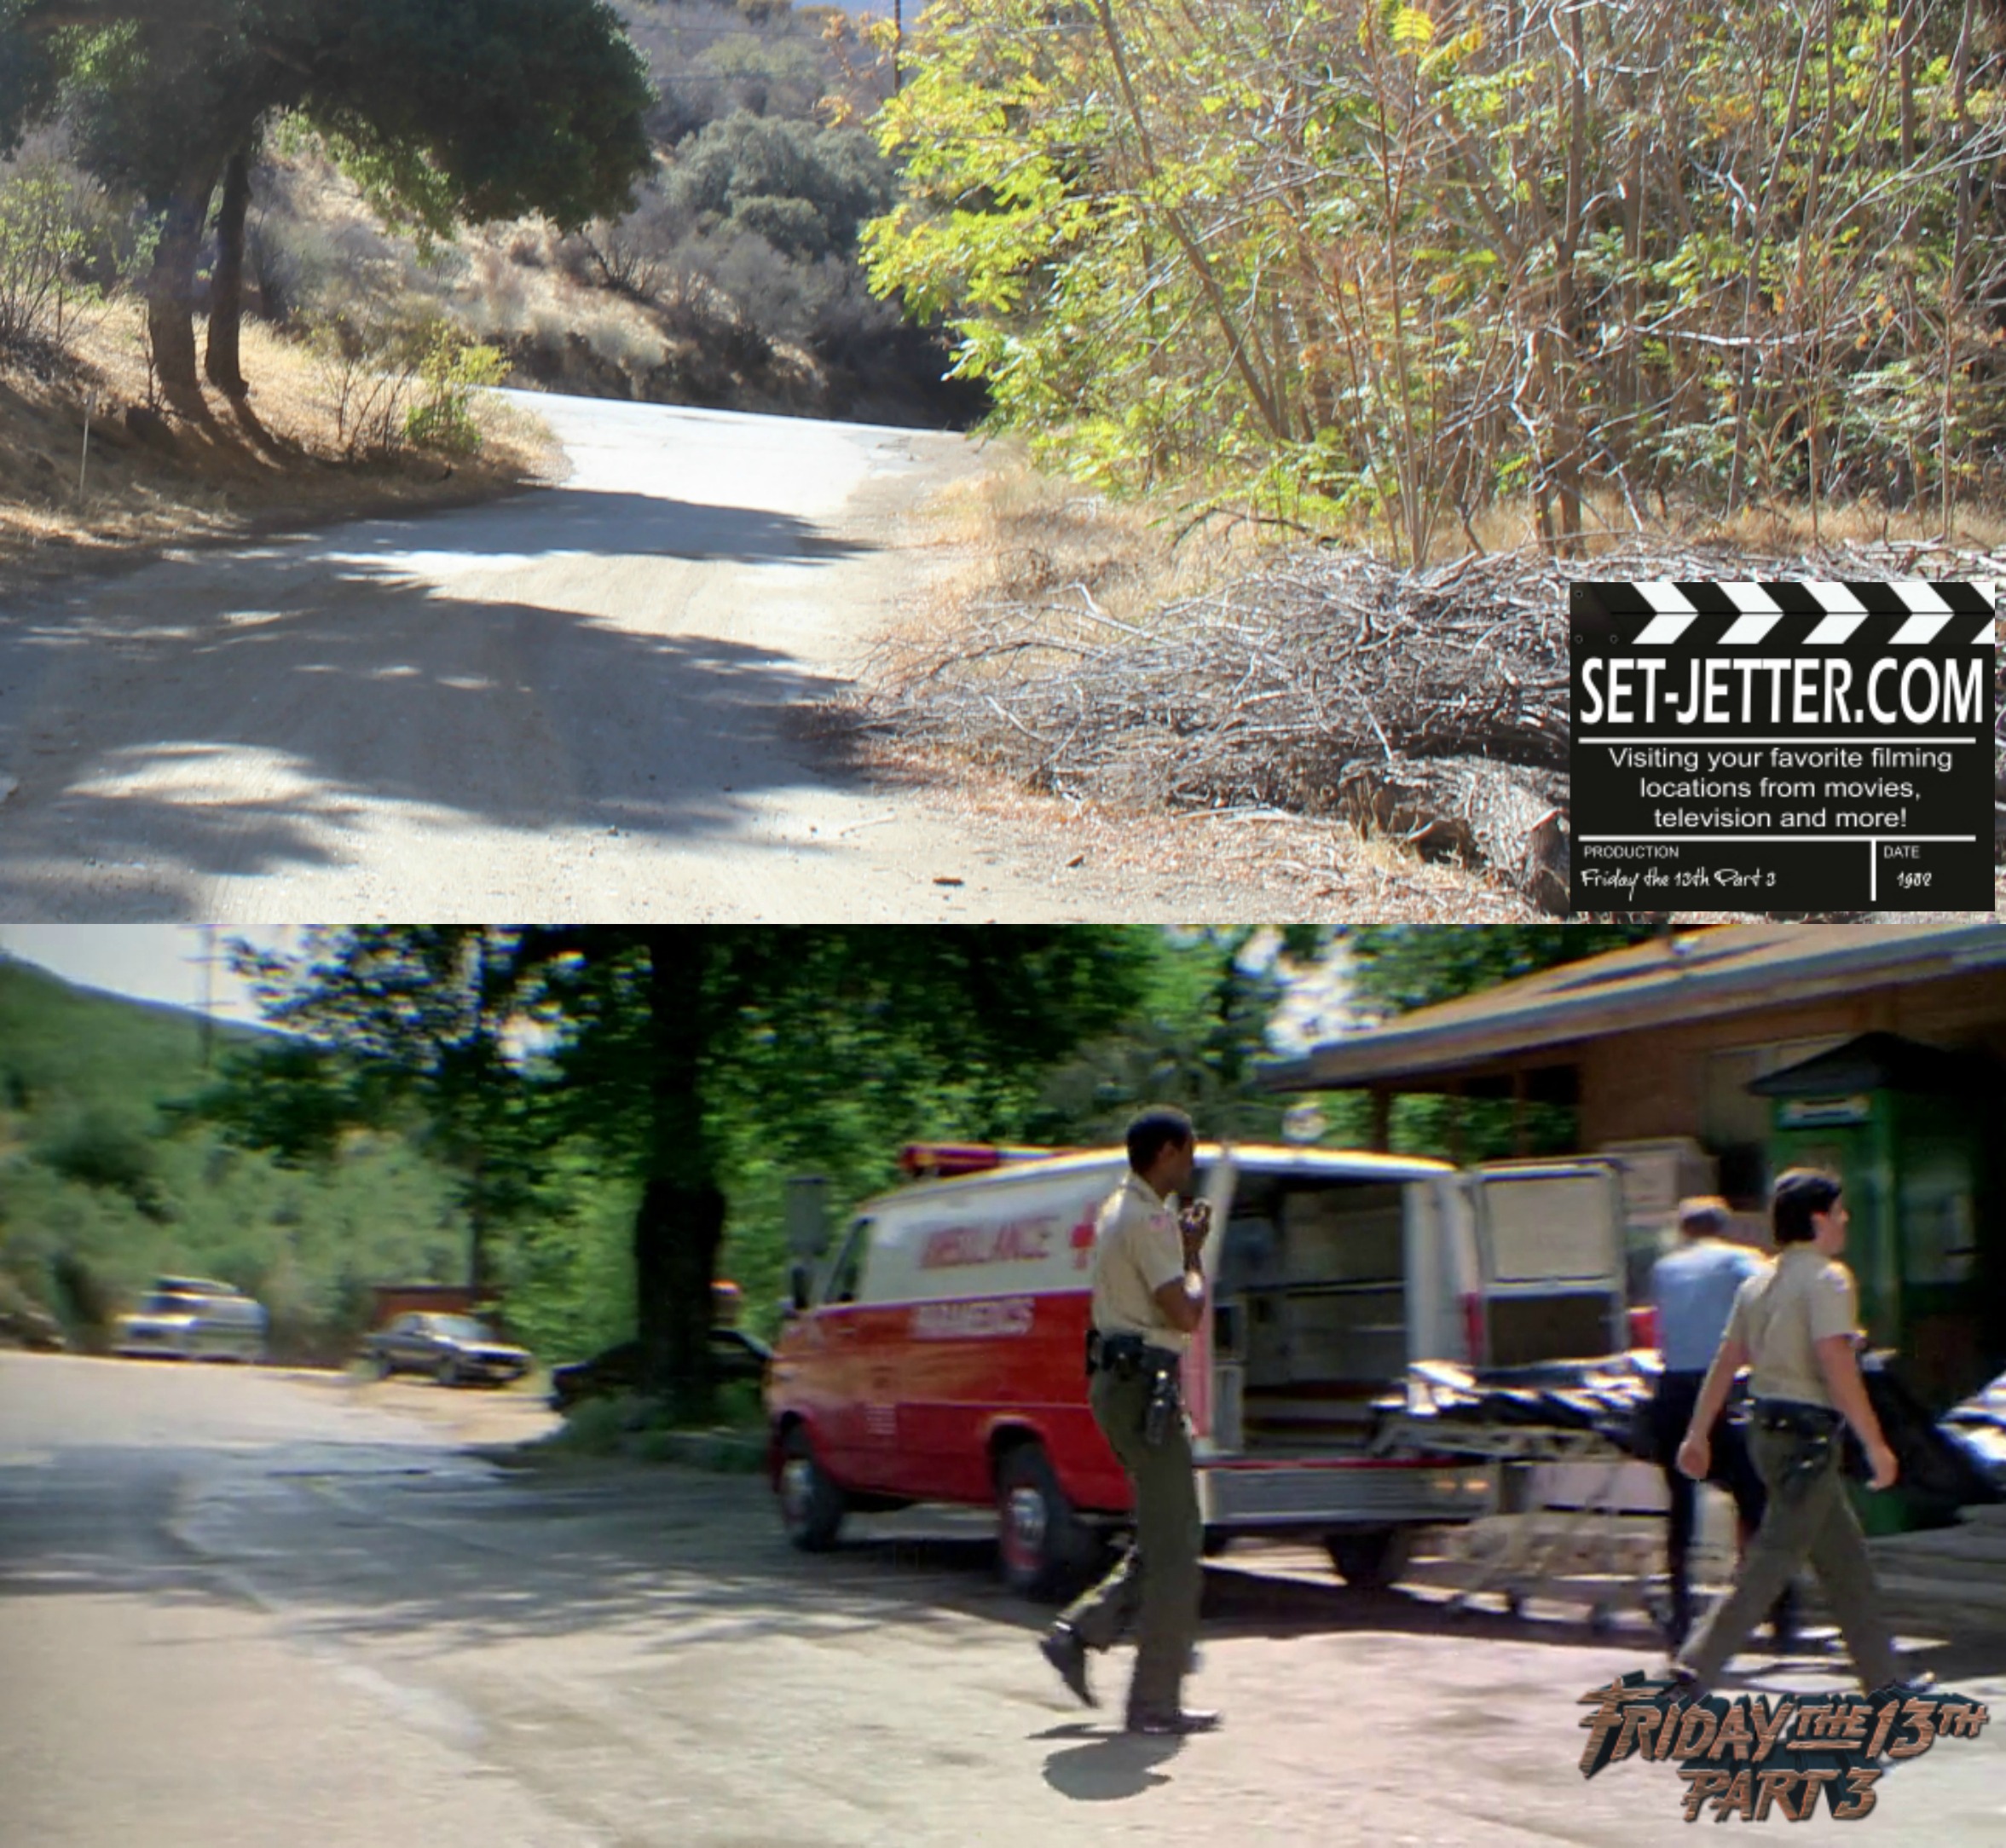 Friday the 13th Part 3 comparison 219.jpg